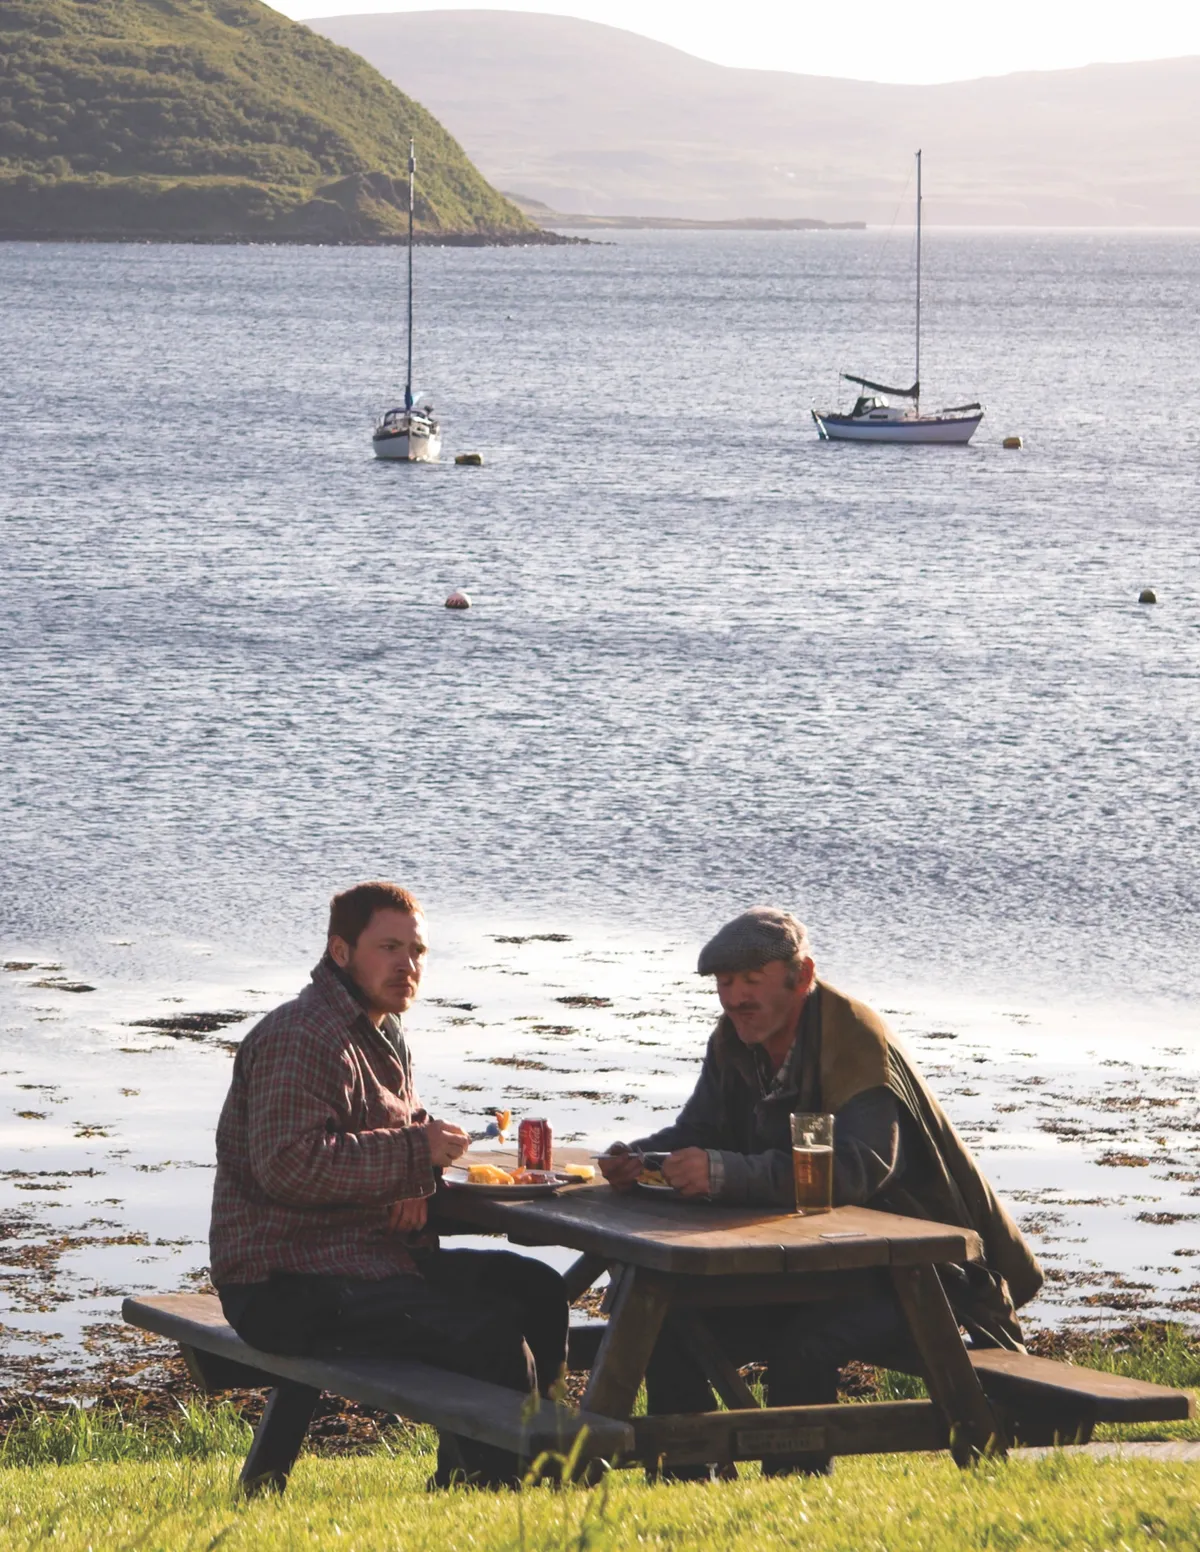 BC2A3R Two men drinking at a picnic table, Stein, Isle of Skye, Inner Hebrides, West Coast of Scotland, UK. Image shot 2009. Exact date unknown.